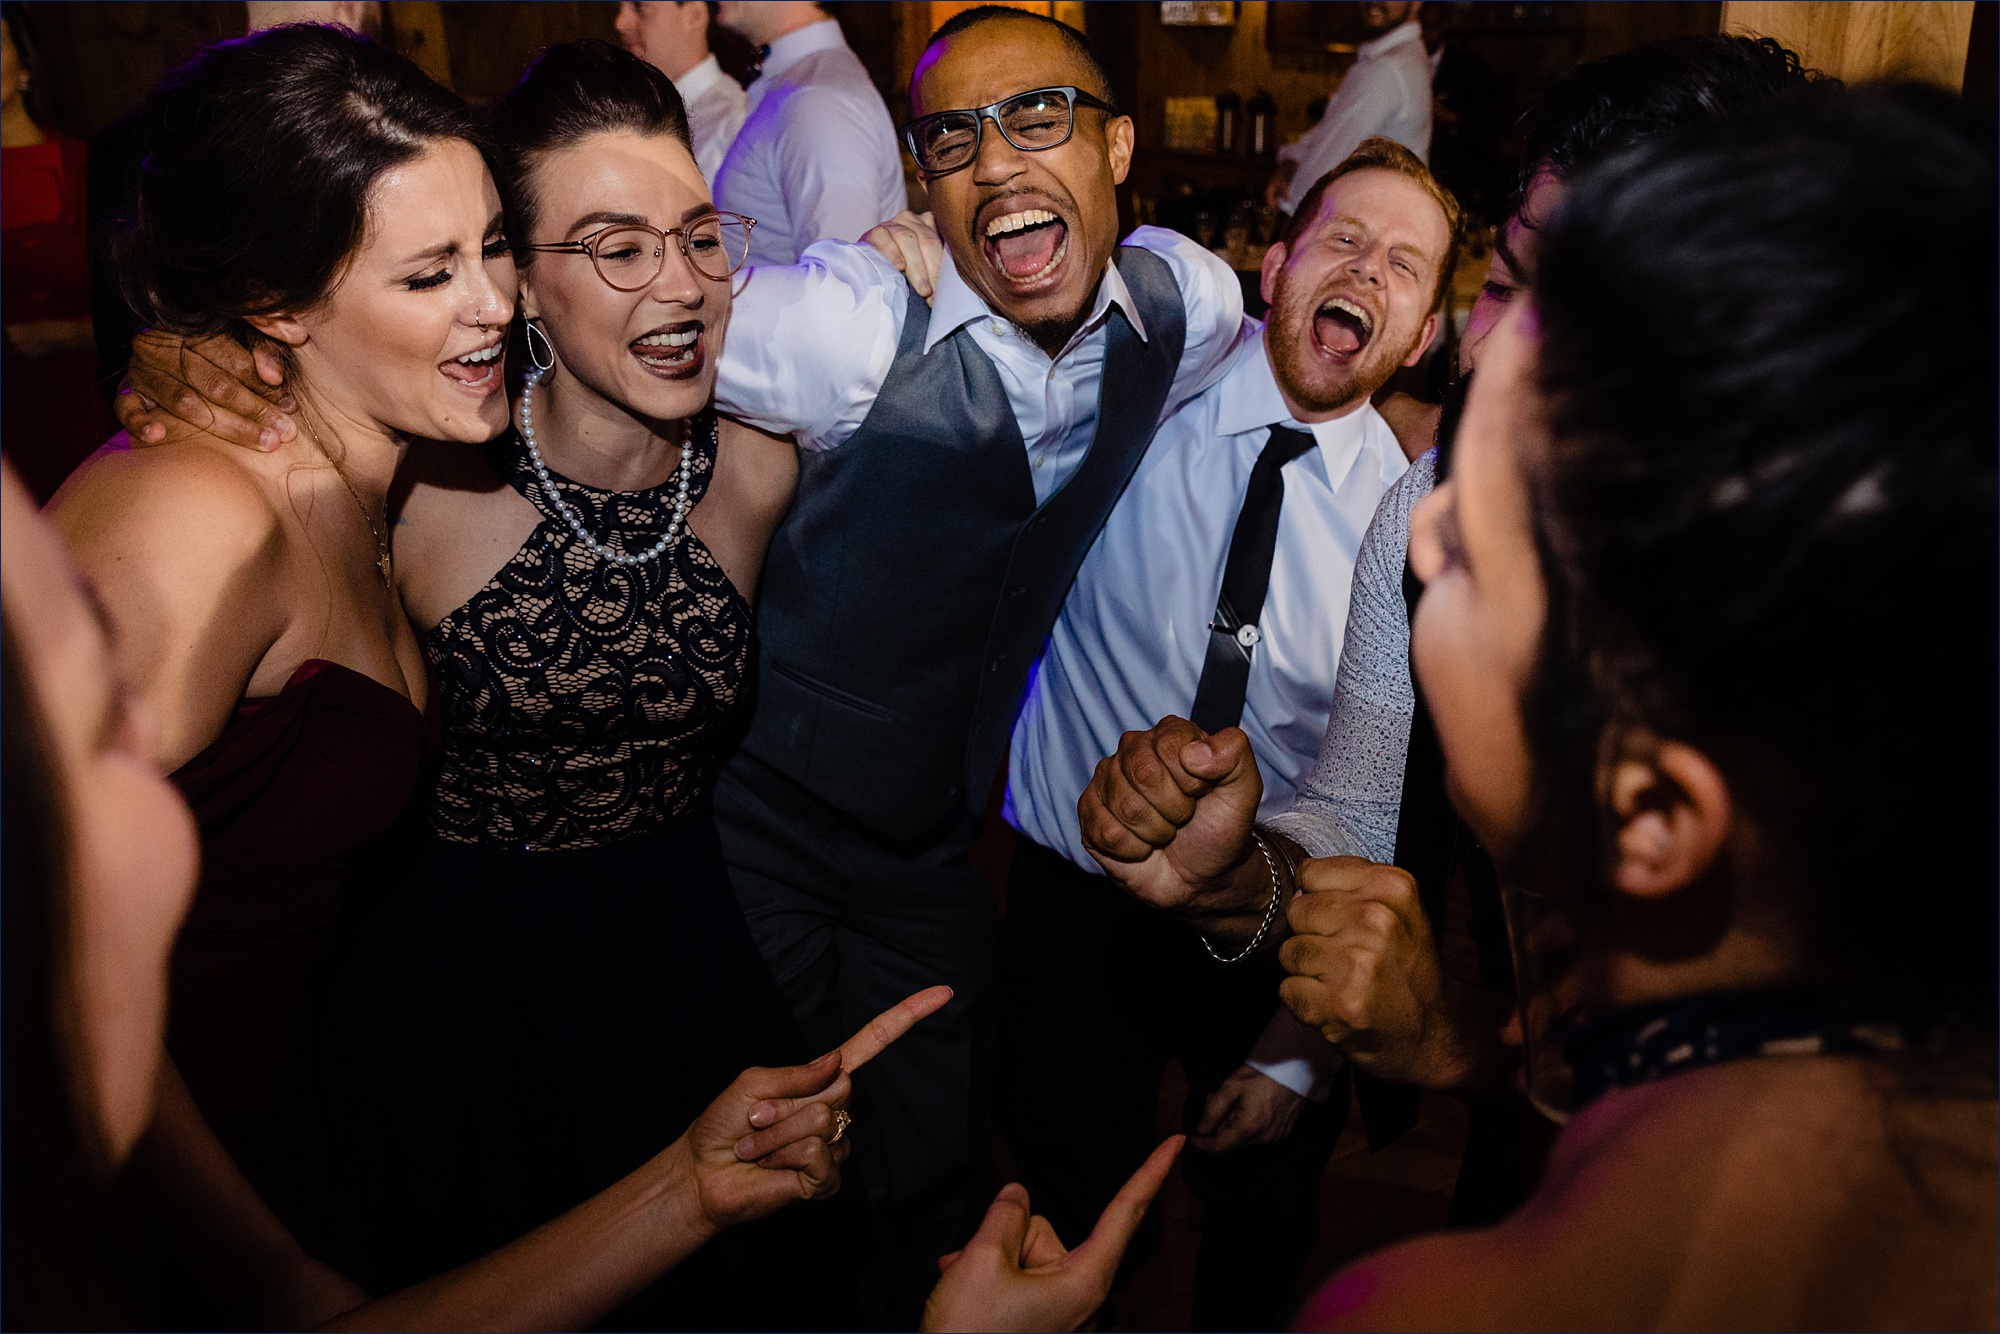 The crowd gets into the music on the dance floor of the wedding